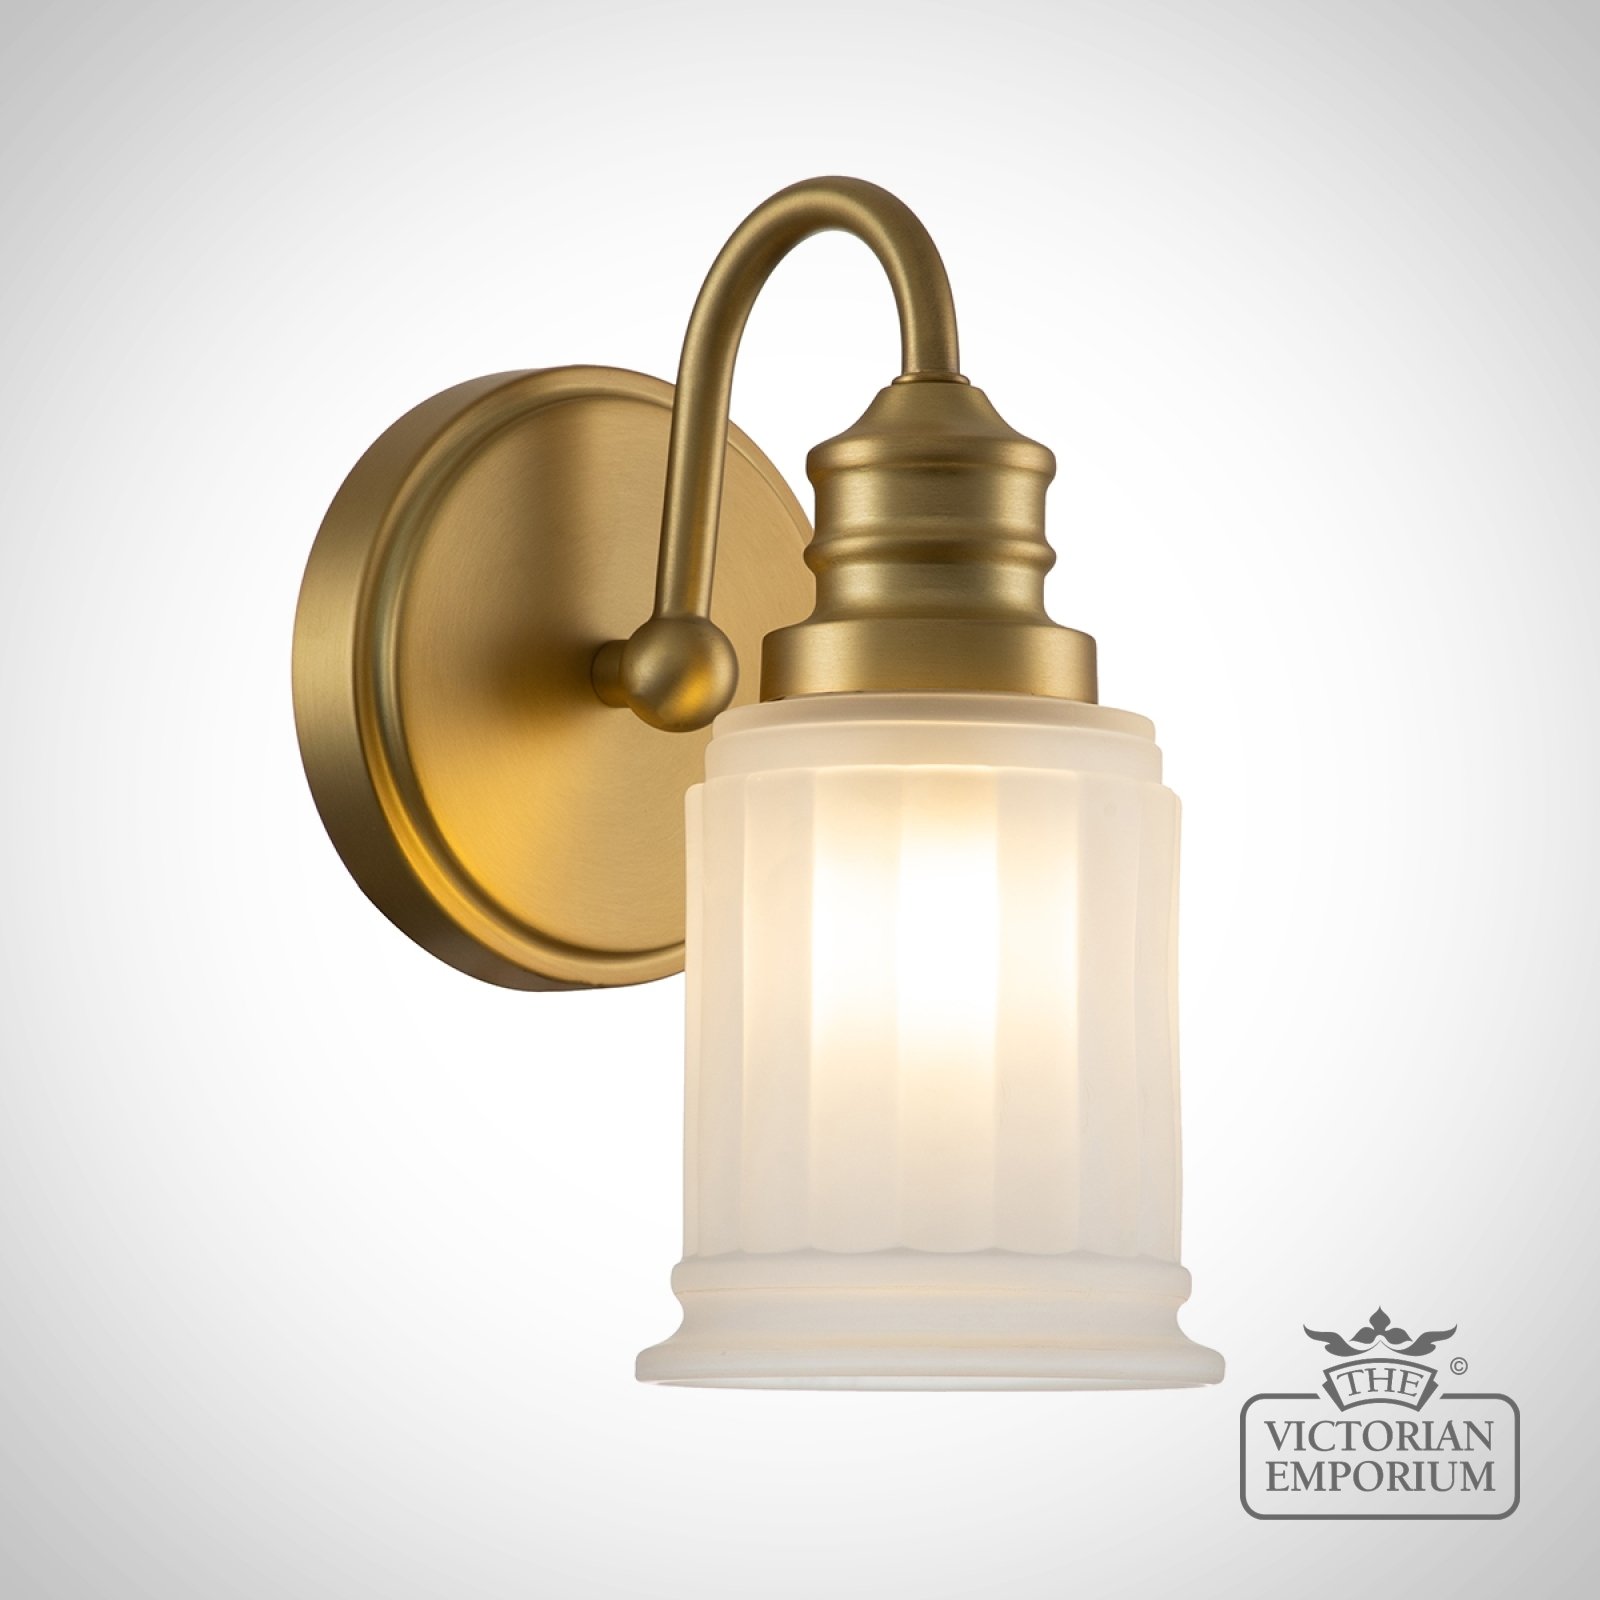 Swell Single Bathroom Wall Light in Weathered Brass